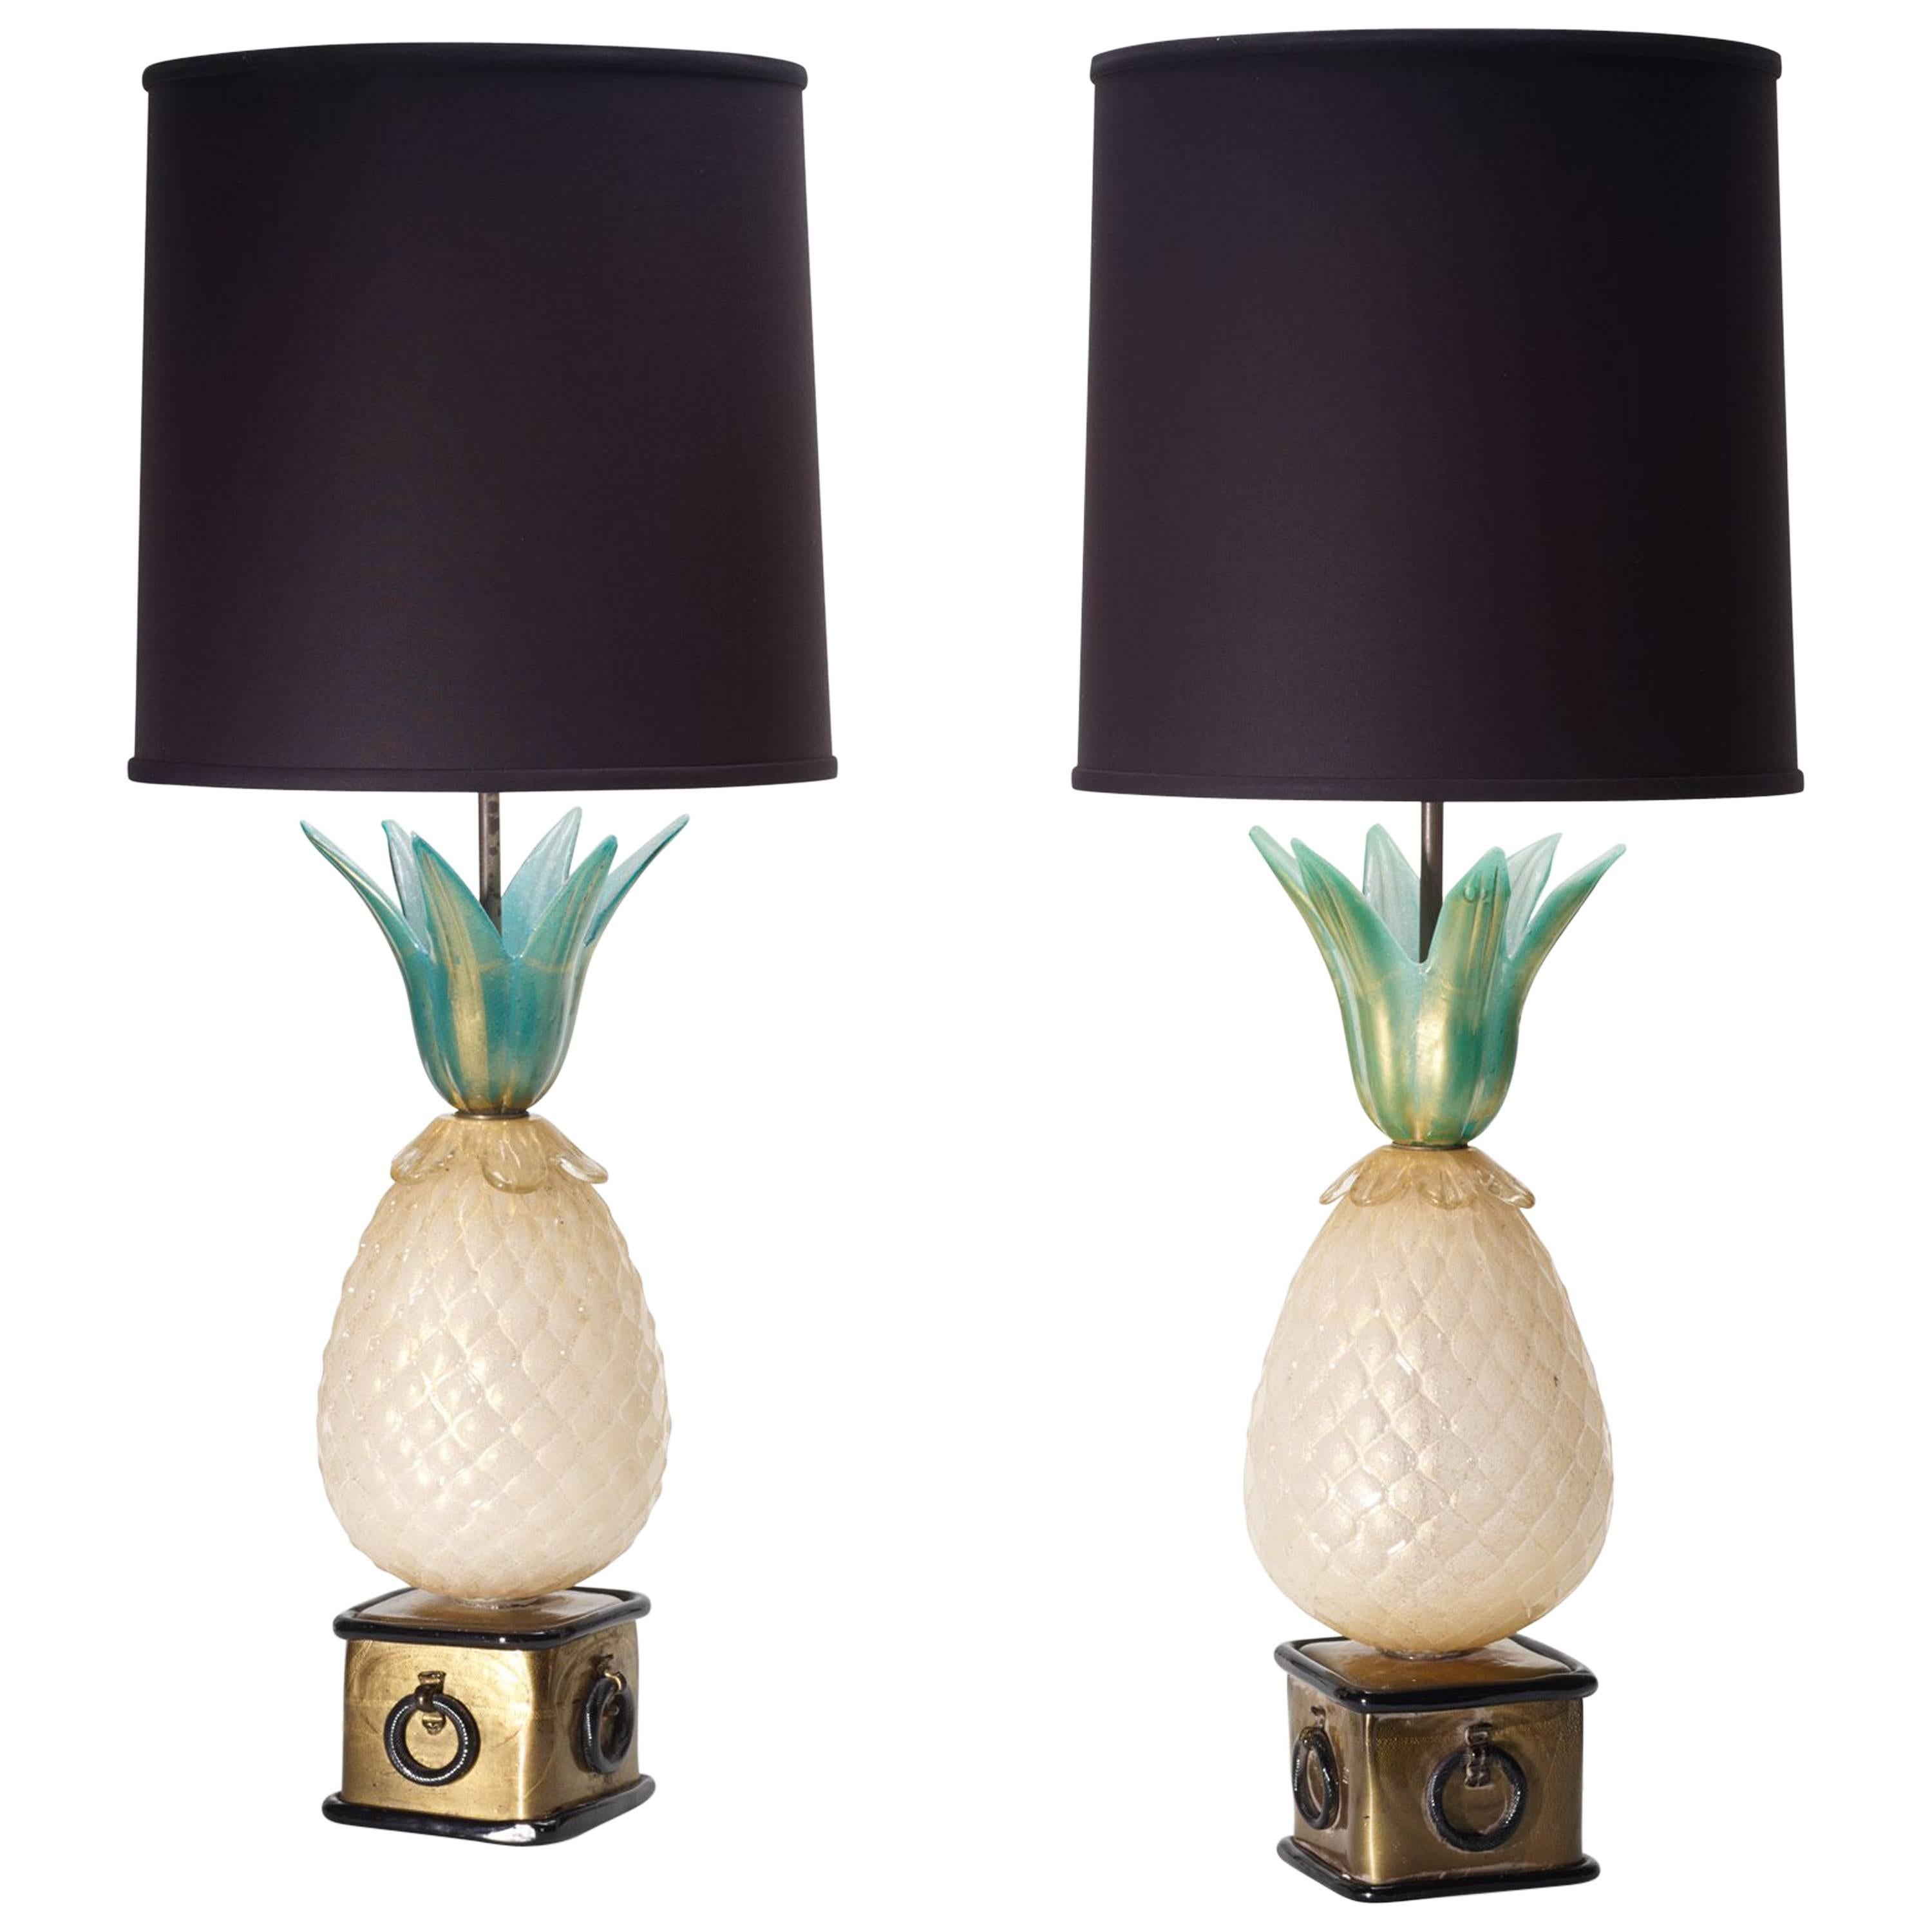 Rare Pair of Murano Glass Pineapple Shapped Lamps by Barovier Toso